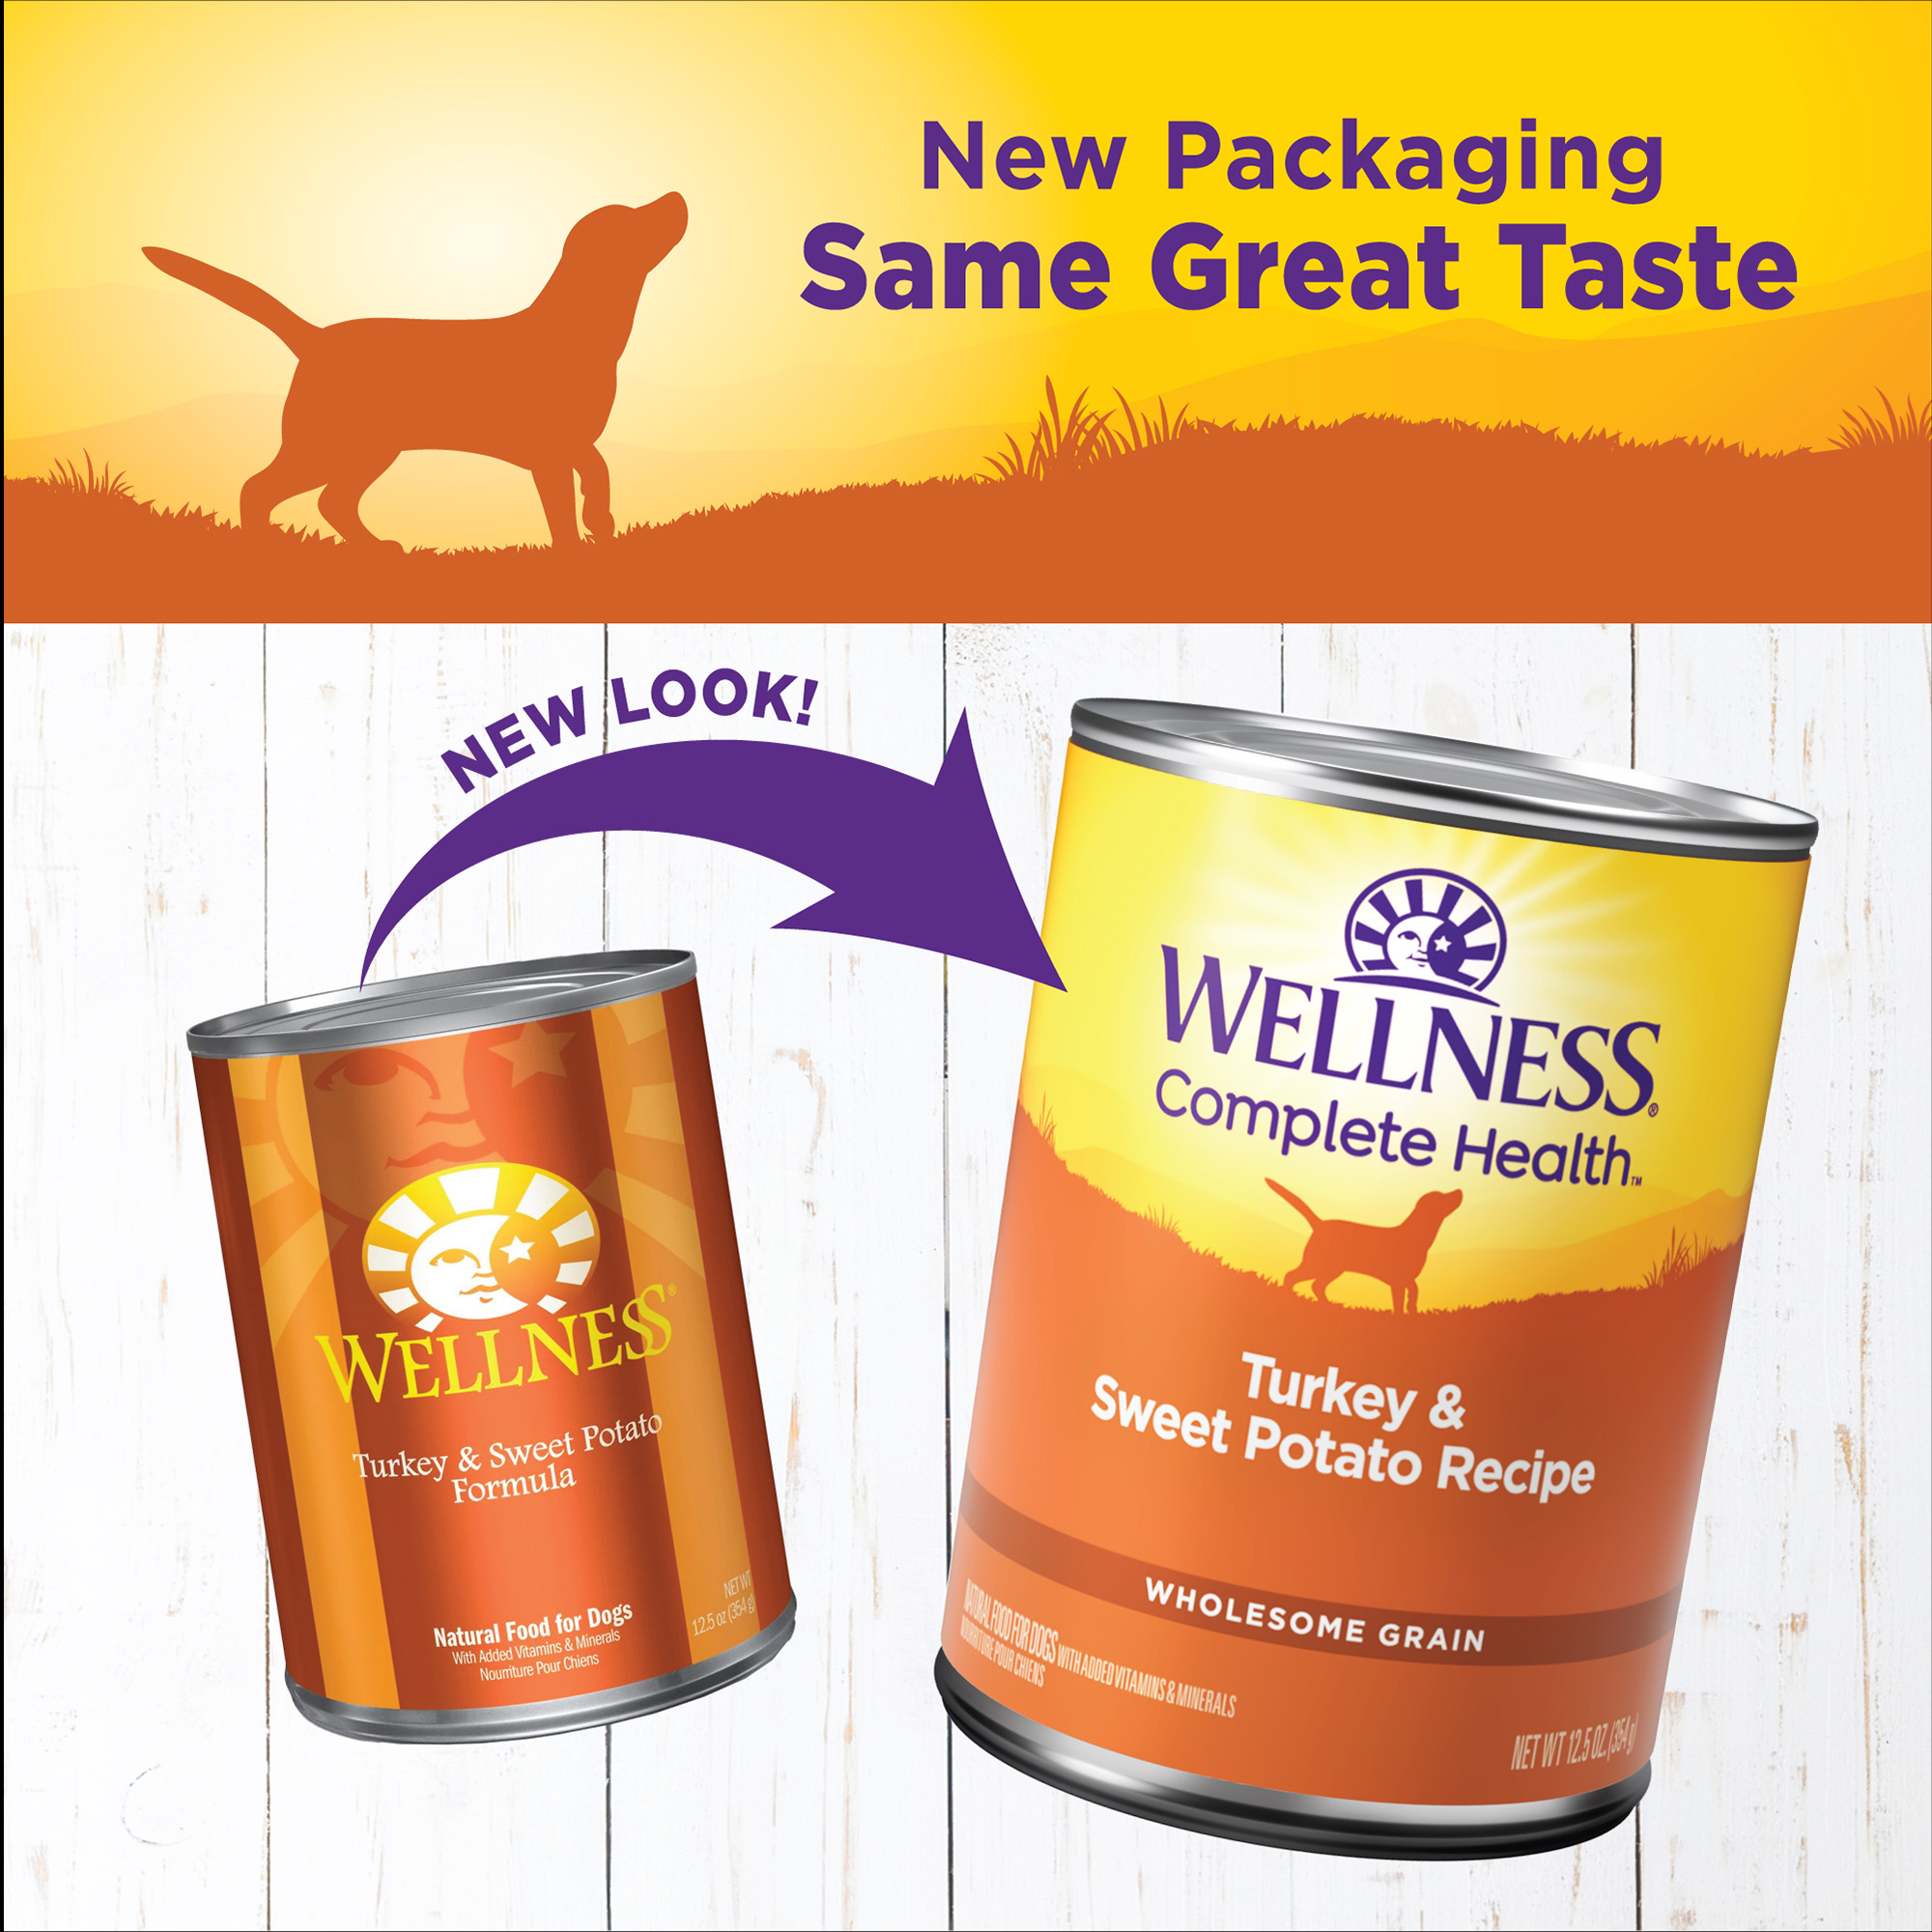 Wellness Complete Health Natural Wet Canned Dog Food Turkey & Sweet Potato, 12.5-Ounce Can (Pack of 12) - image 3 of 7